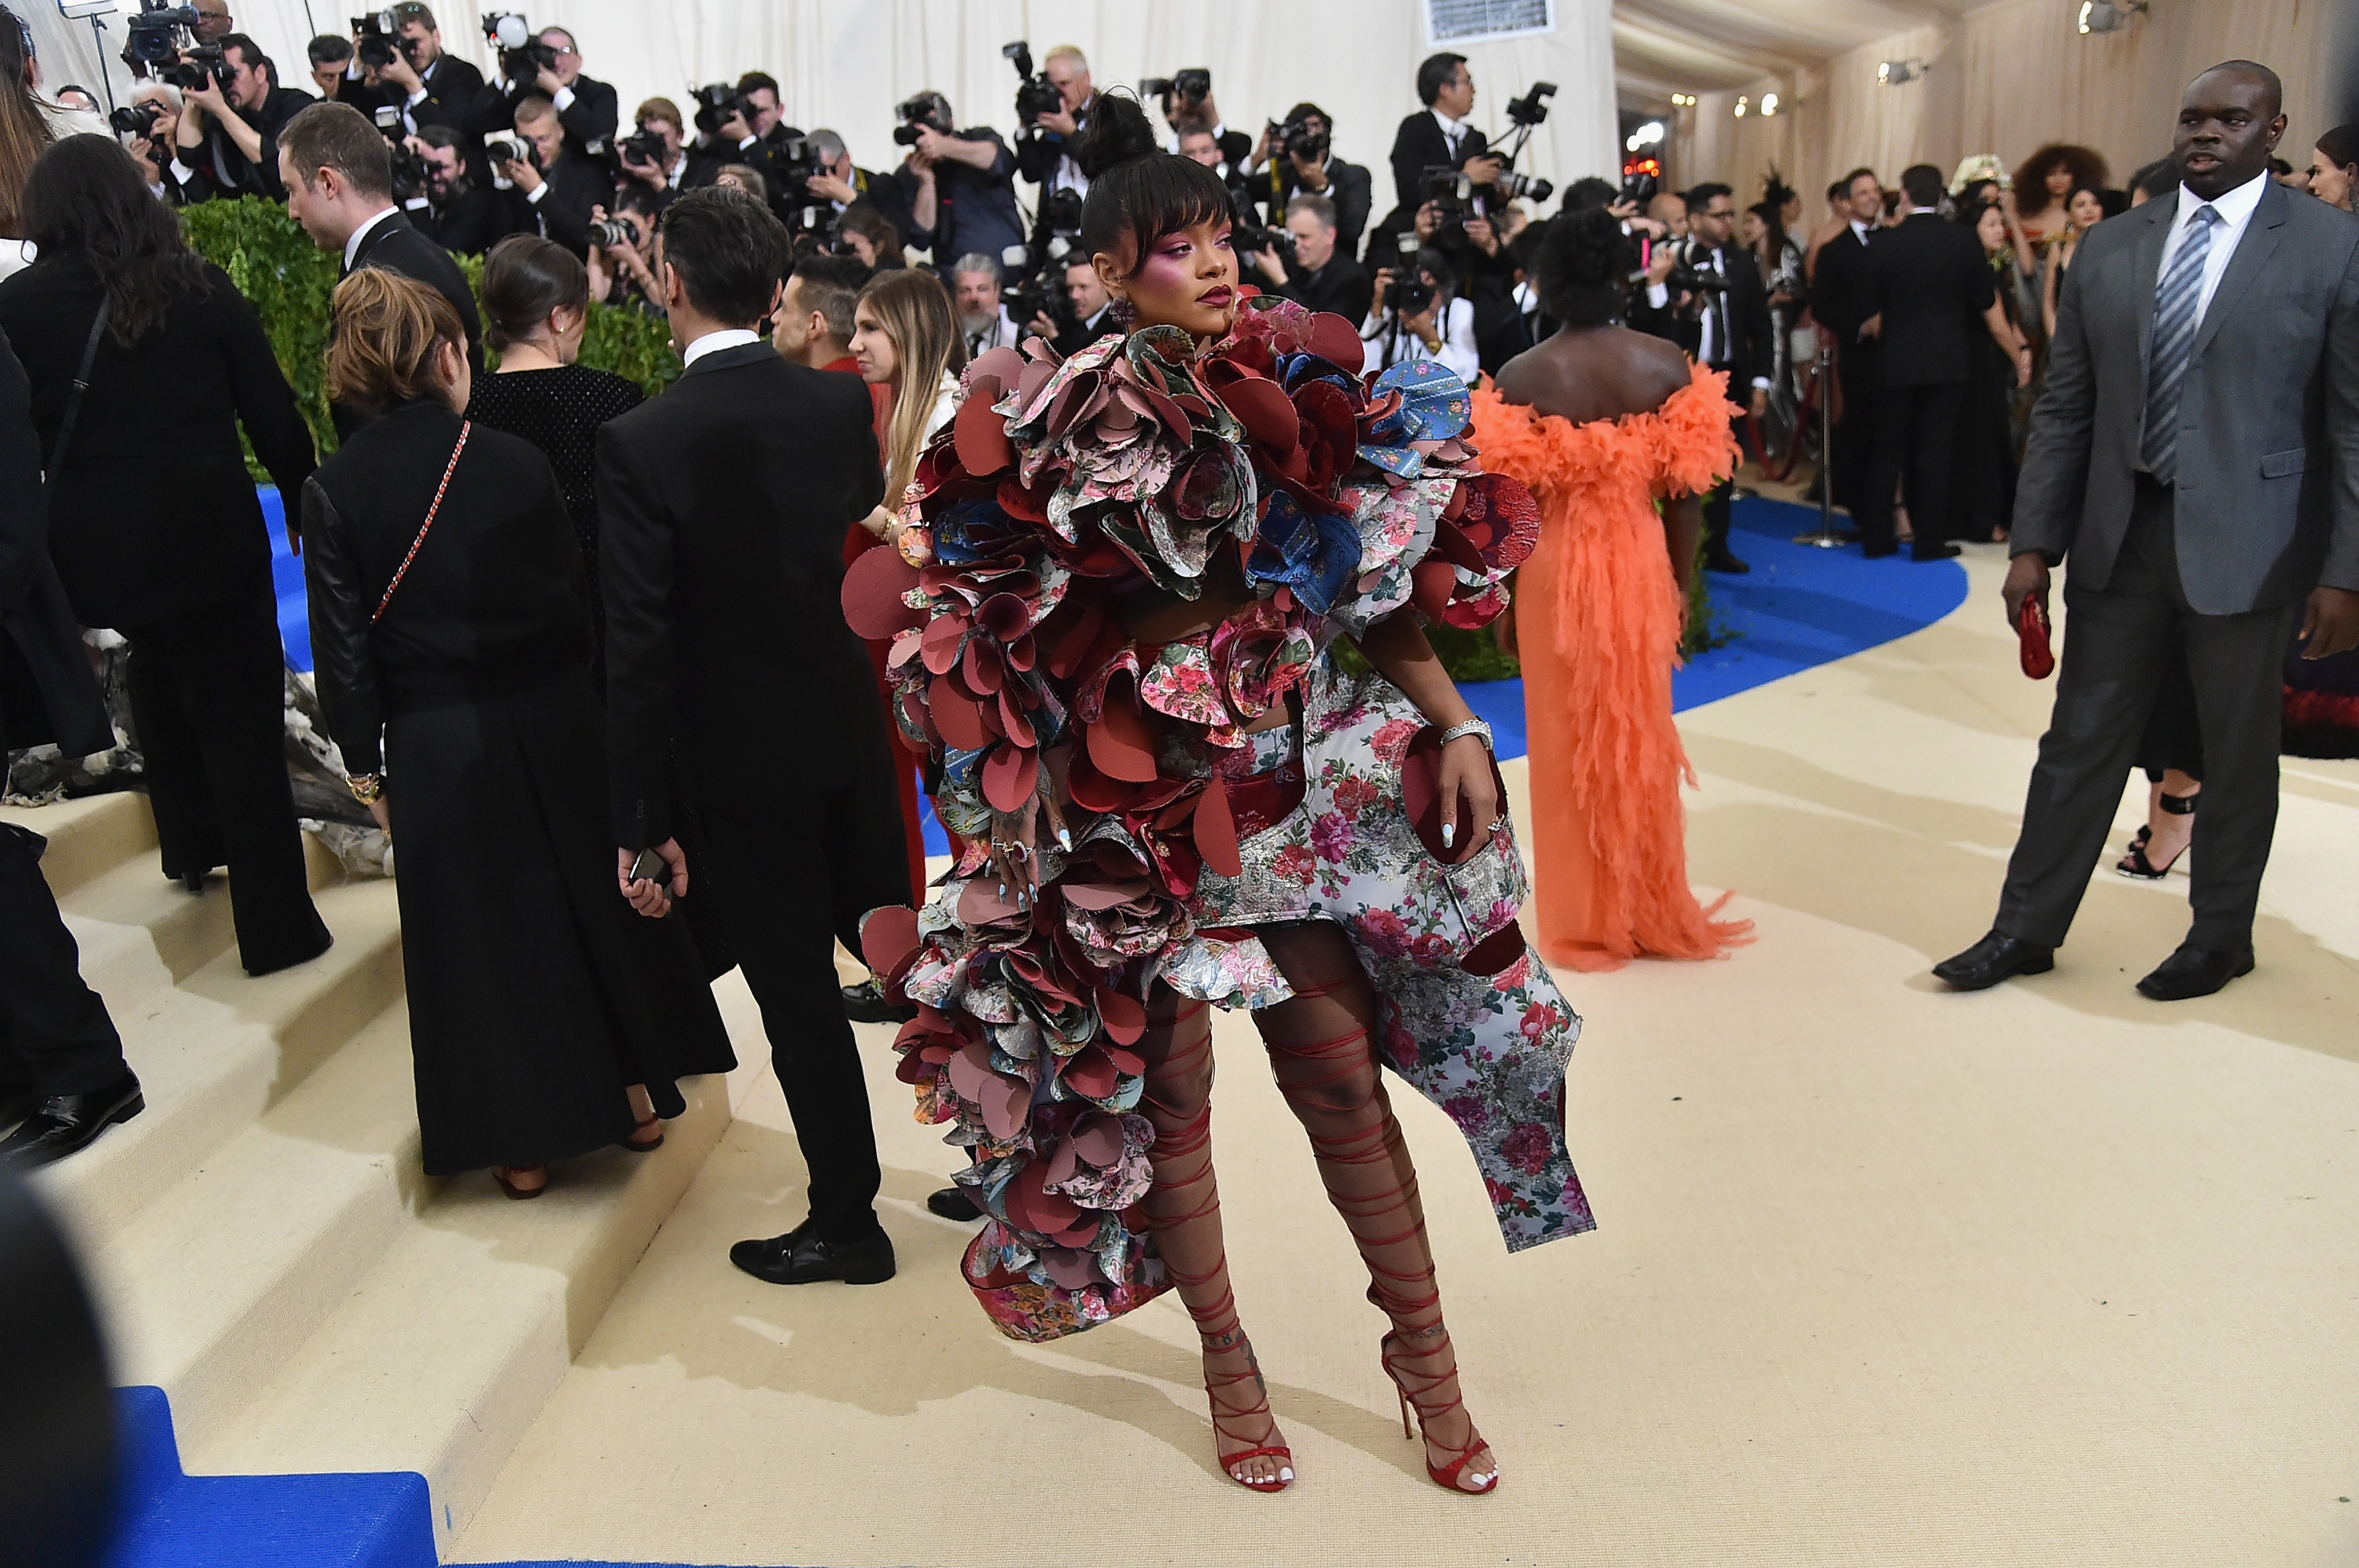 Rihanna attends the "Rei Kawakubo/Comme des Garcons: Art Of The In-Between" Costume Institute Gala at Metropolitan Museum of Art on May 1, 2017. (Mike Coppola—Getty Images for People.com)